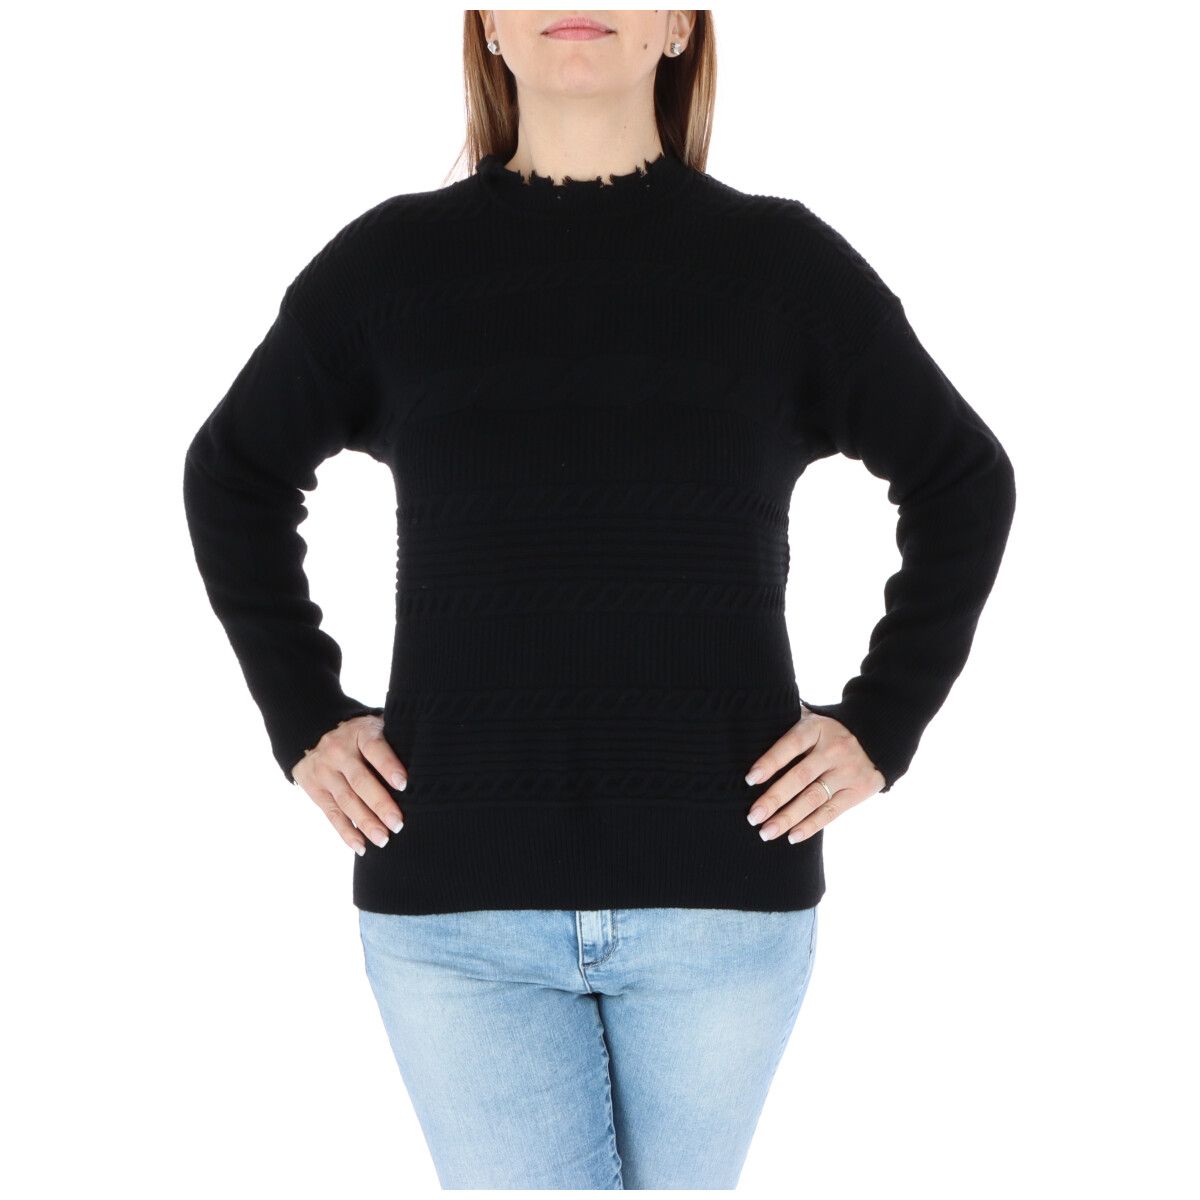 Brand: Pinko
Gender: Women
Type: Knitwear
Season: Fall/Winter

PRODUCT DETAIL
• Color: black
• Sleeves: long
• Neckline: round neck
•  Article code: 1N12YF Y6DG

COMPOSITION AND MATERIAL
• Composition: -20% polyamide -28% polyester -52% viscose 
•  Washing: machine wash at 30°